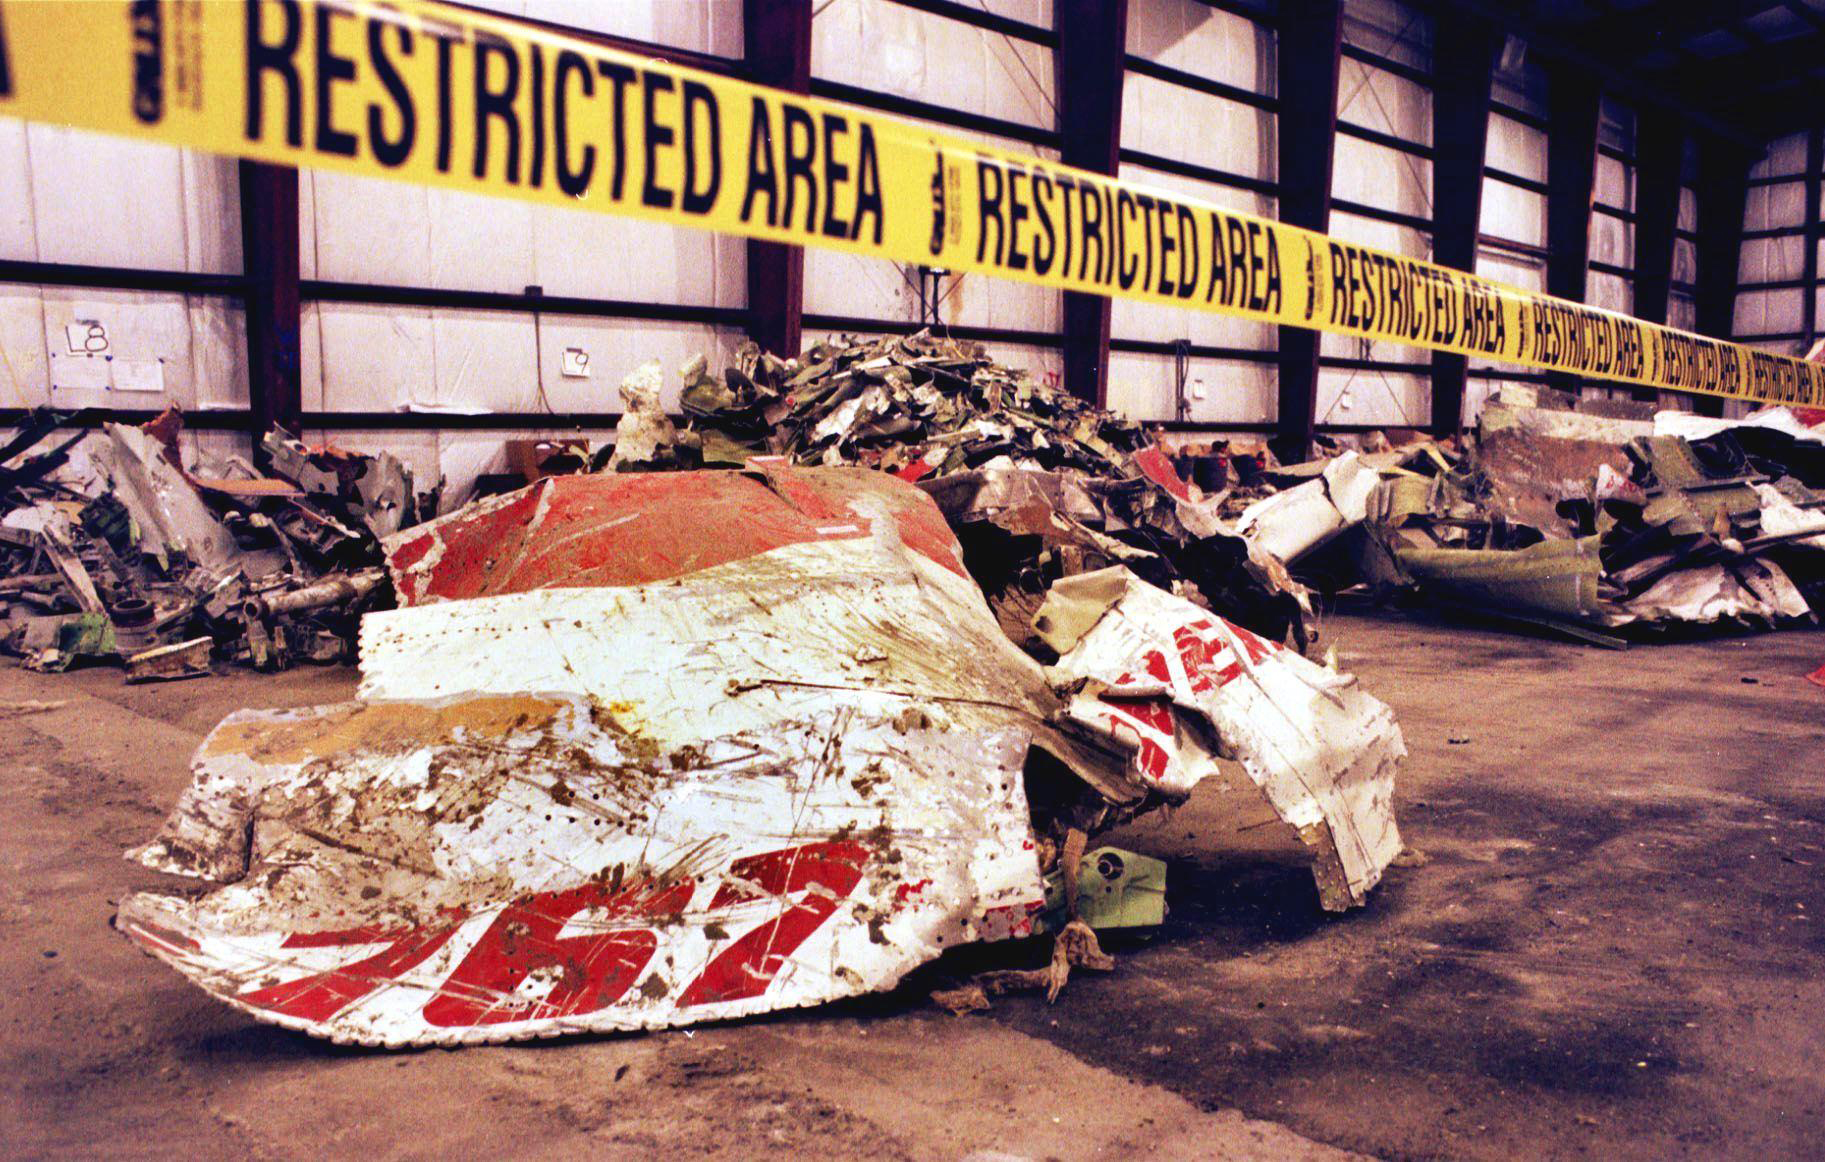 PHOTO: Piles of wreckage from EgyptAir Flight 990, in which 217 passengers and crew lost their lives when it crashed into the Atlantic Ocean last year, is seen in a hanger at the former Quonset Point Navy Base in Kingstown, R.I., Nov. 1, 2000.  